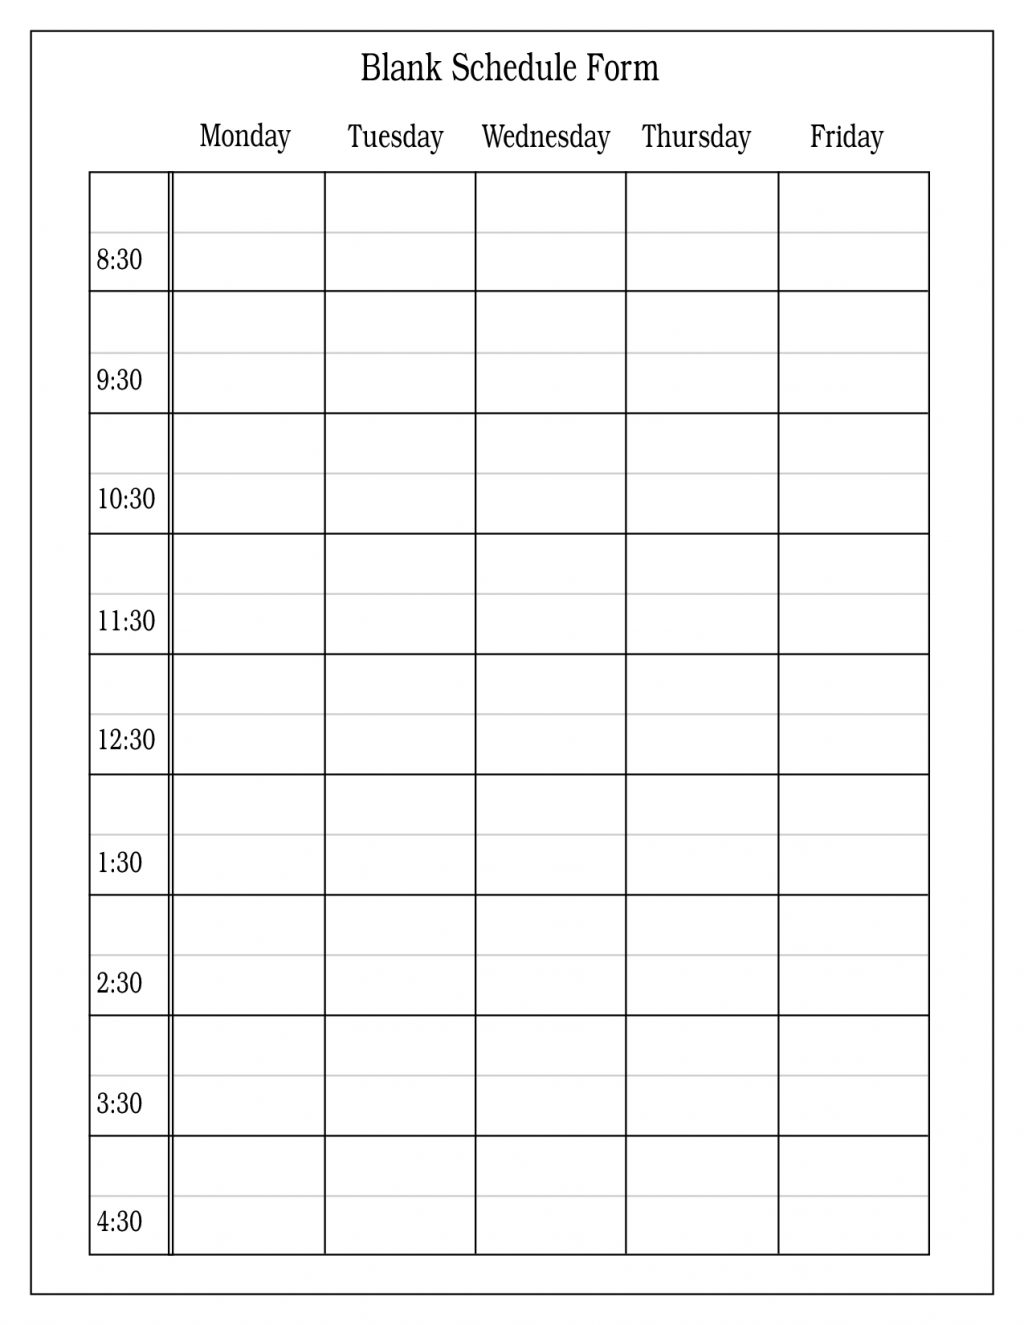 Schedule Template Summer Daily Camp Planner Calendar | Smorad inside Summer Camp Schedule Template Blank